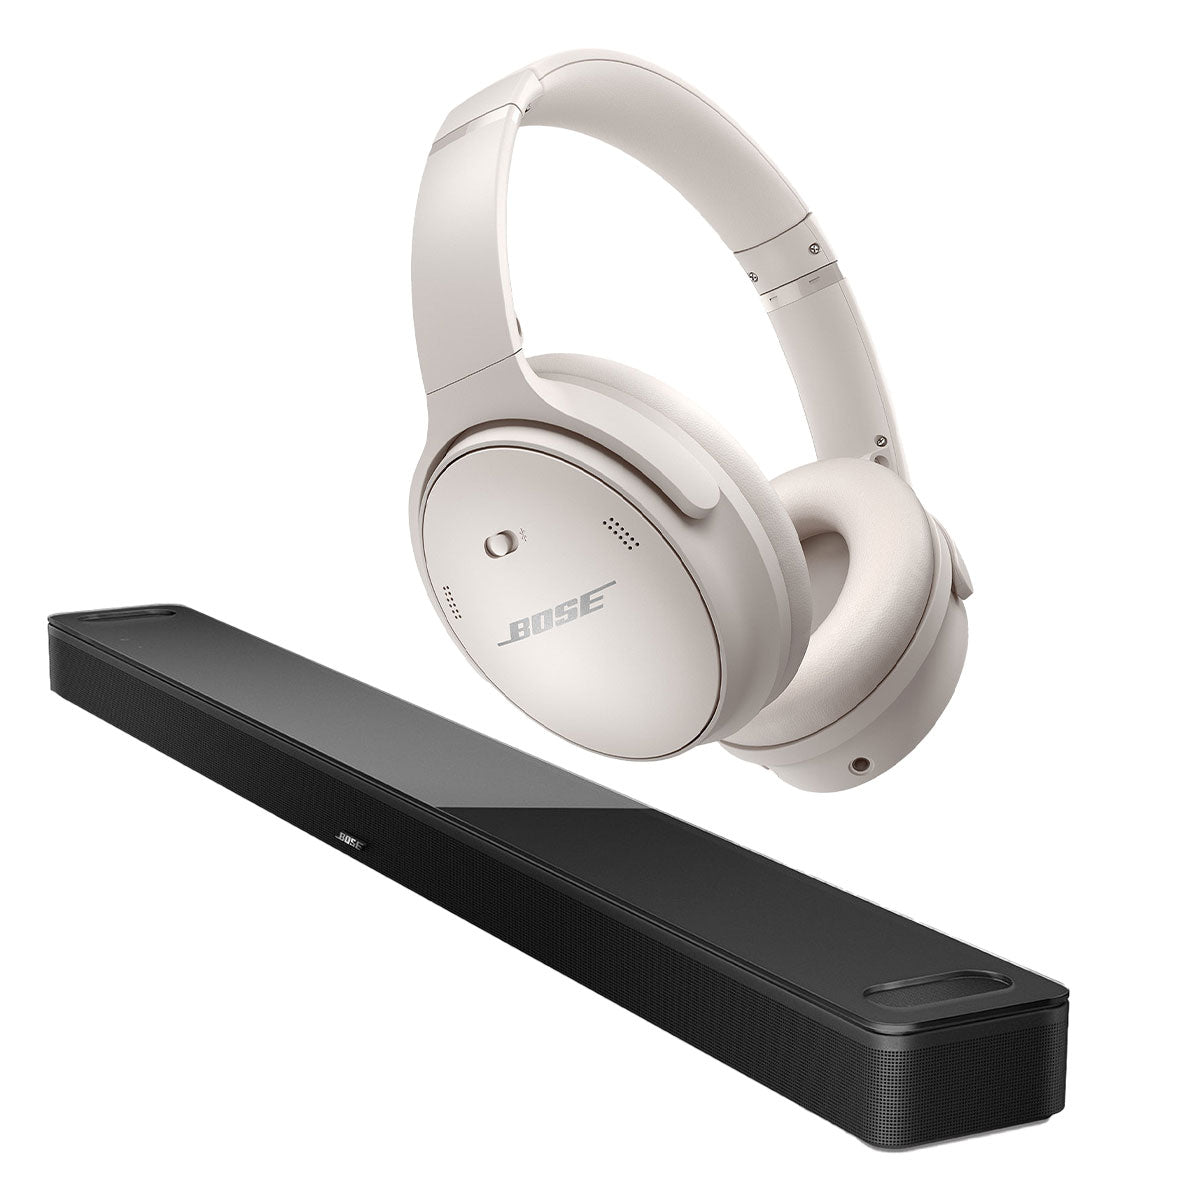 Bose QuietComfort 45 Wireless Noise Canceling Headphones (White) and Bose Smart Soundbar 900 with Dolby Atmos (Black)